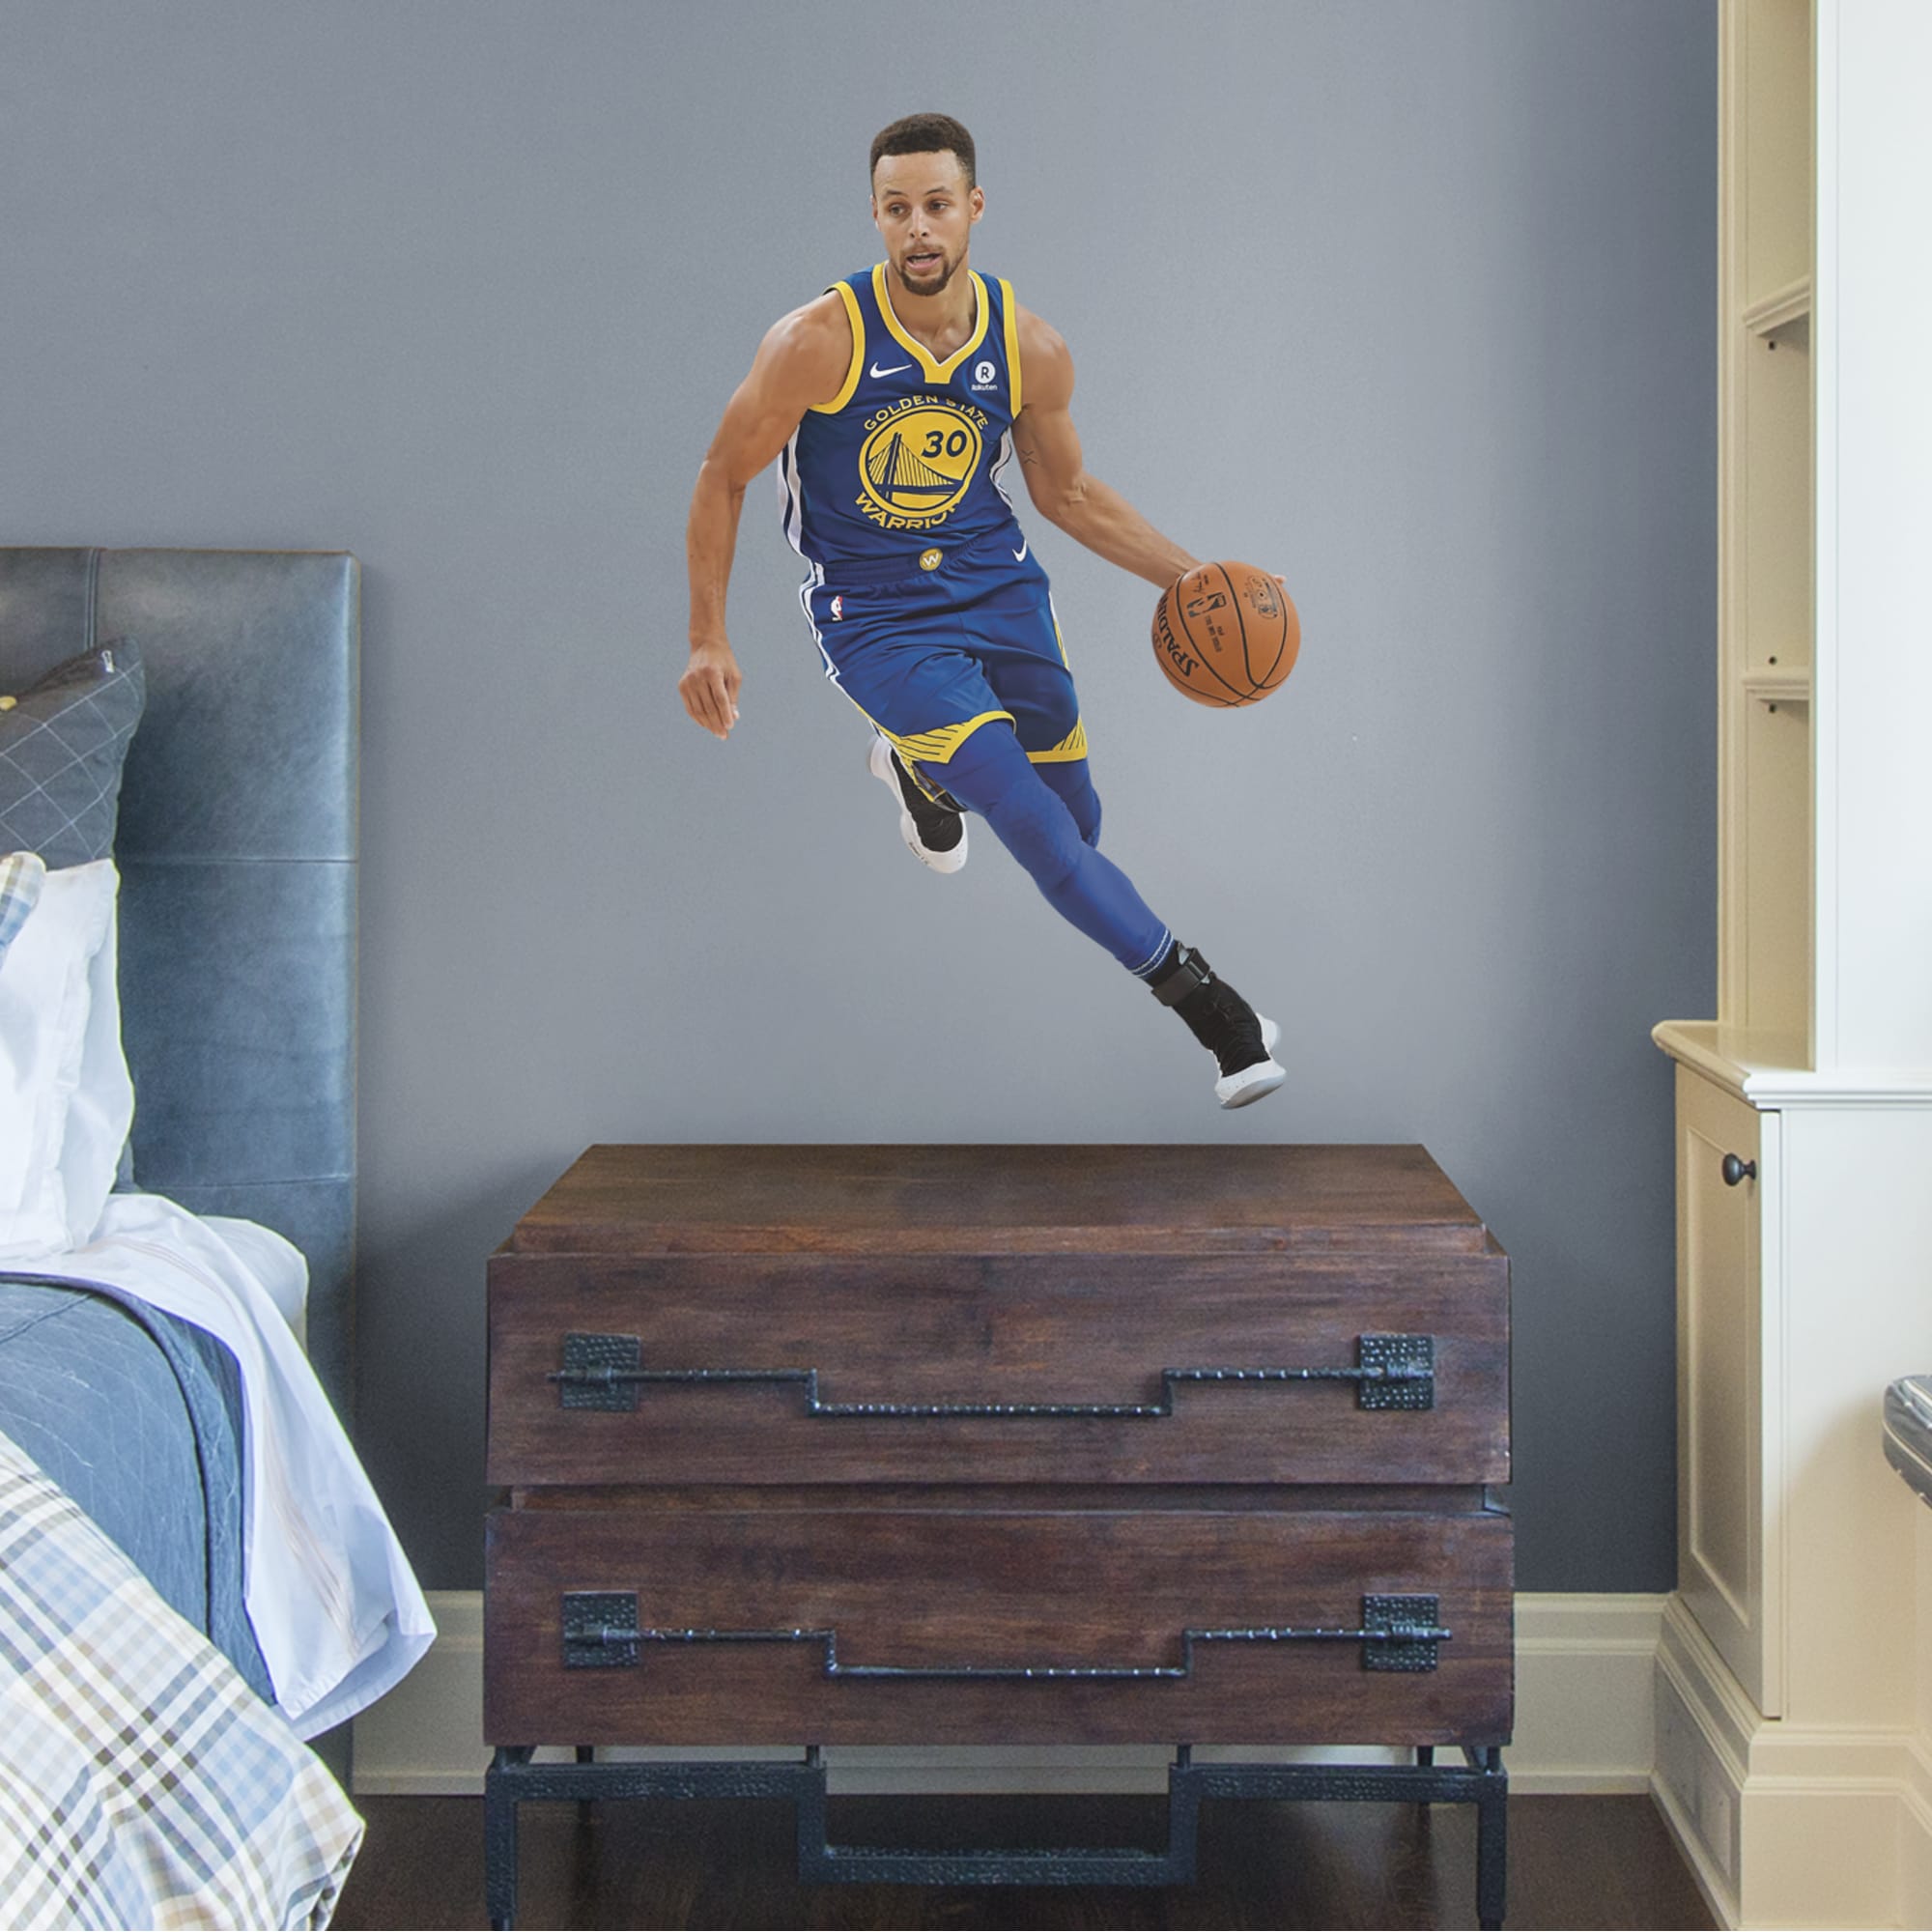 Stephen Curry for Golden State Warriors - Officially Licensed NBA Removable Wall Decal 24.0"W x 39.0"H by Fathead | Vinyl